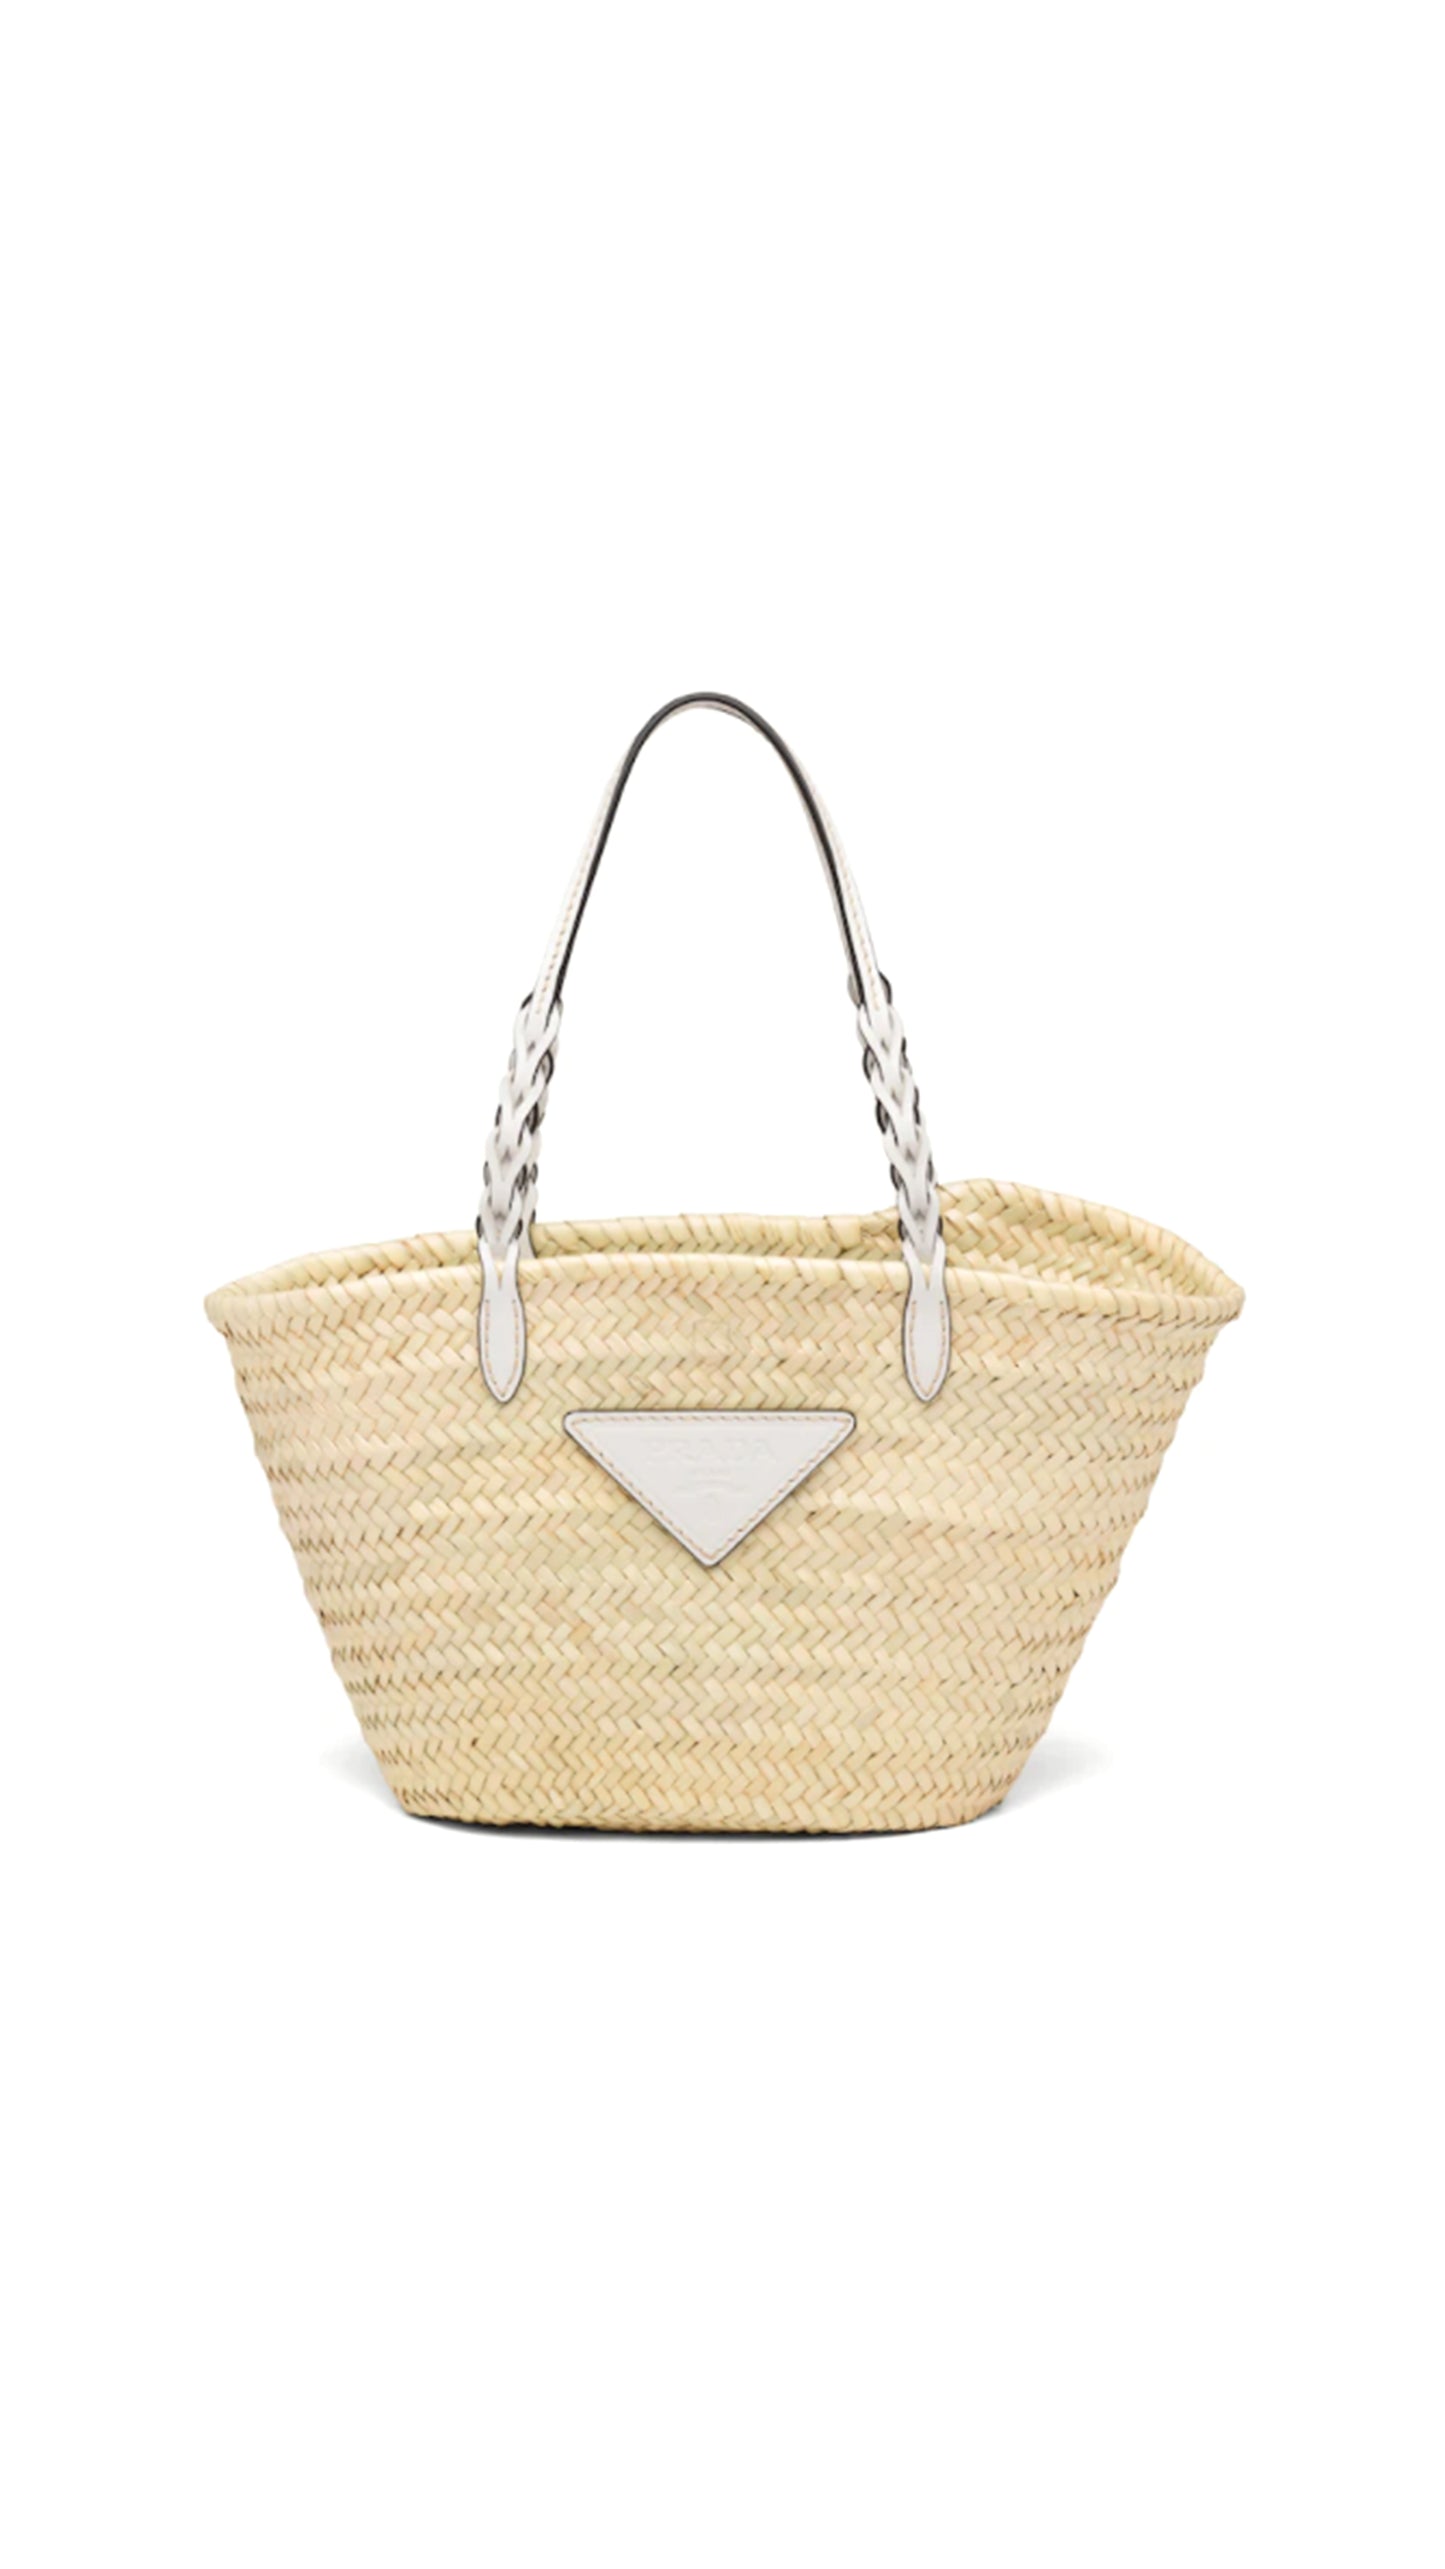 Woven Palm and Leather Tote - White.